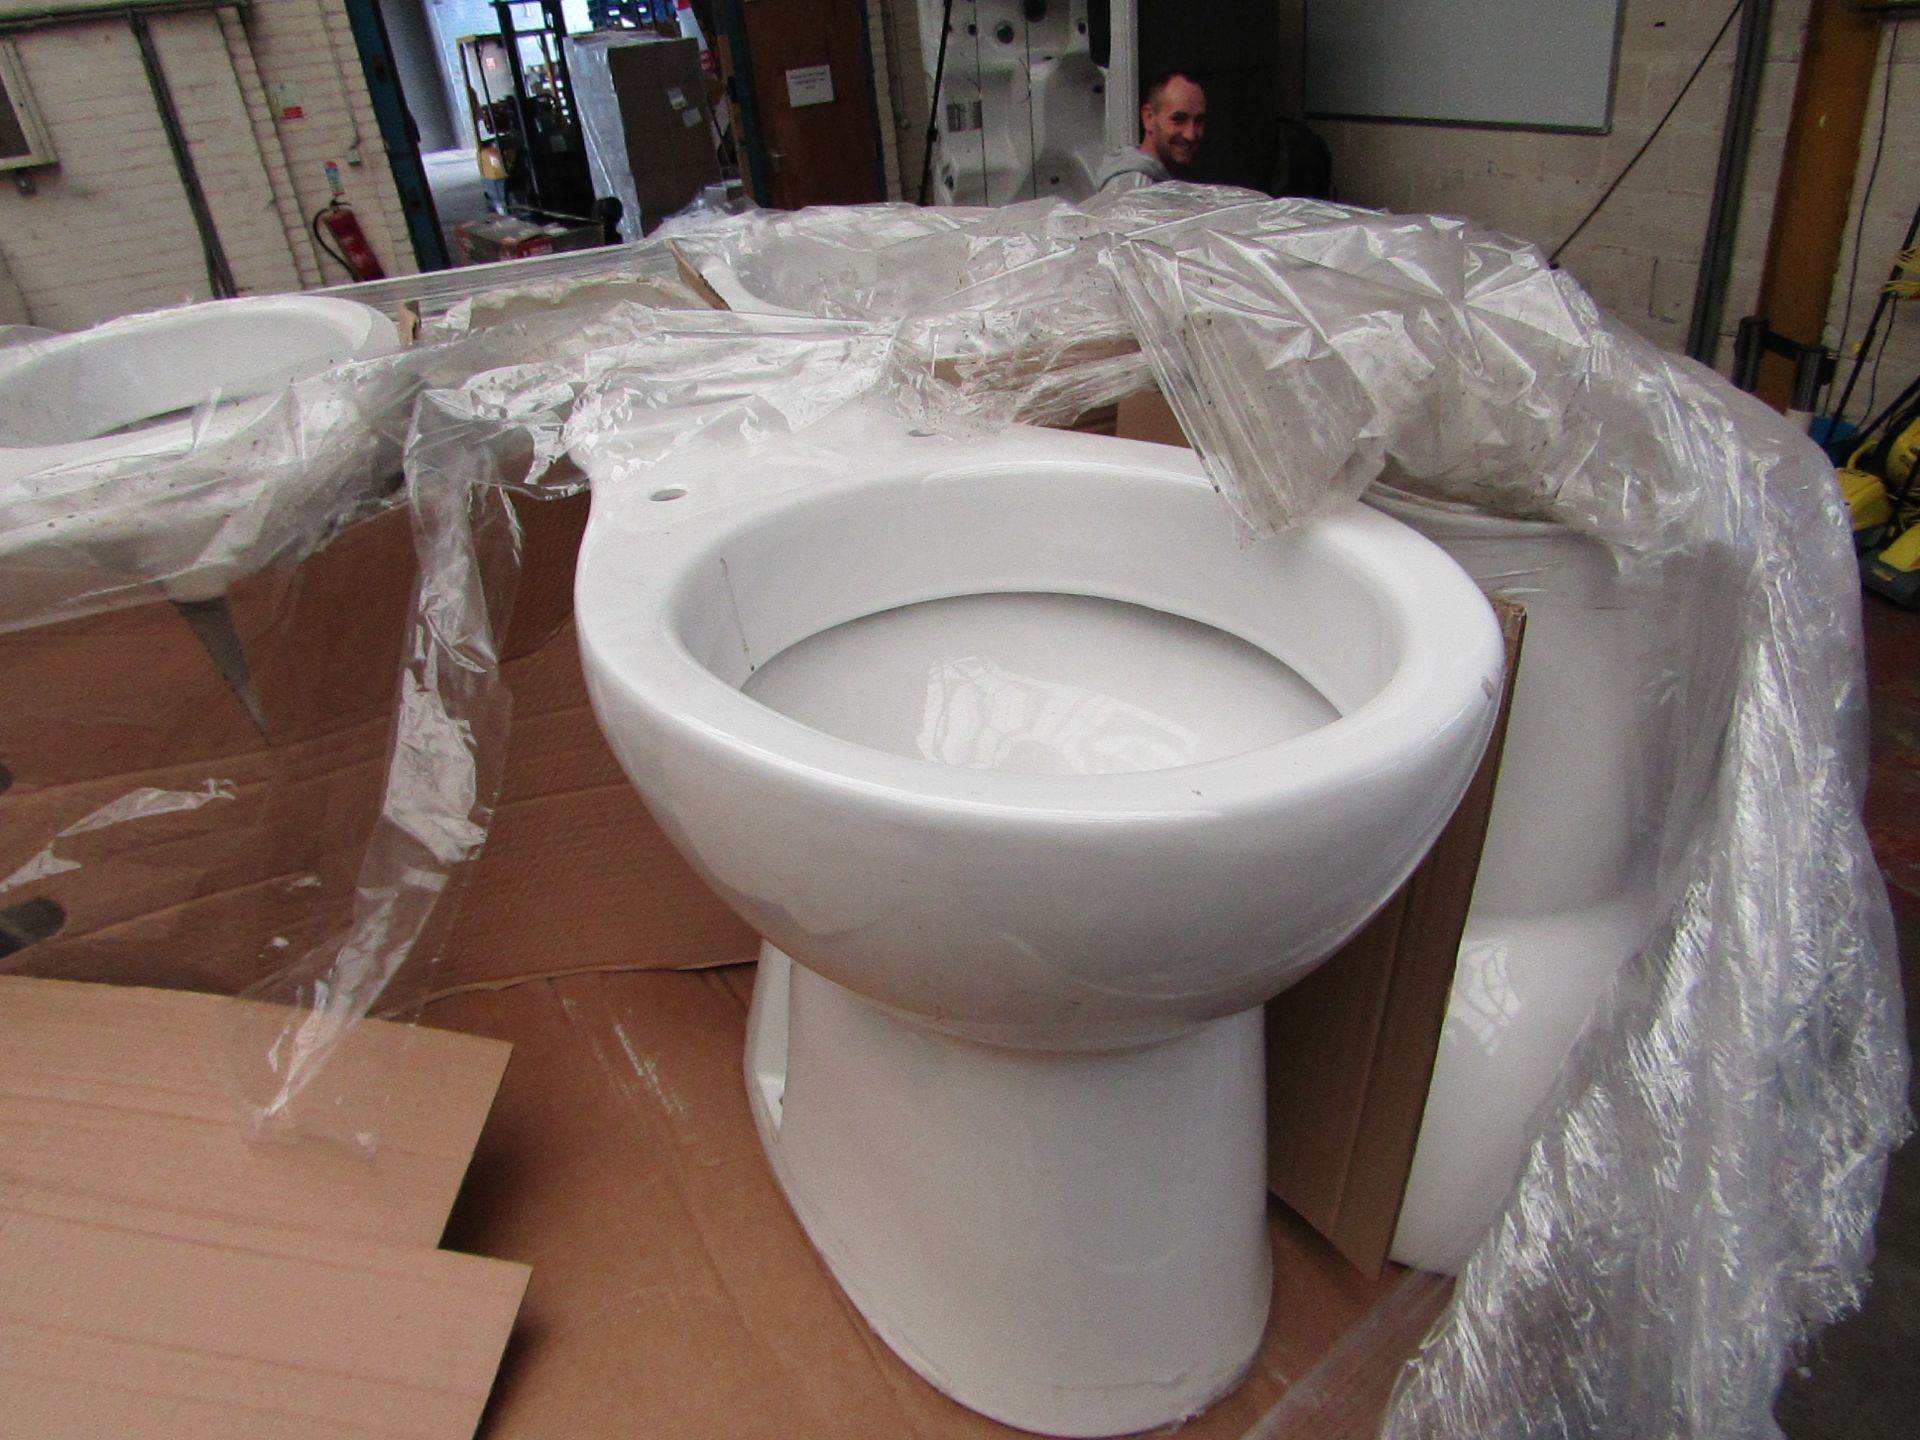 Unbranded Roca Close Coupled Toilet which includes Cistern, Pan, Flush system and toilet seat, all